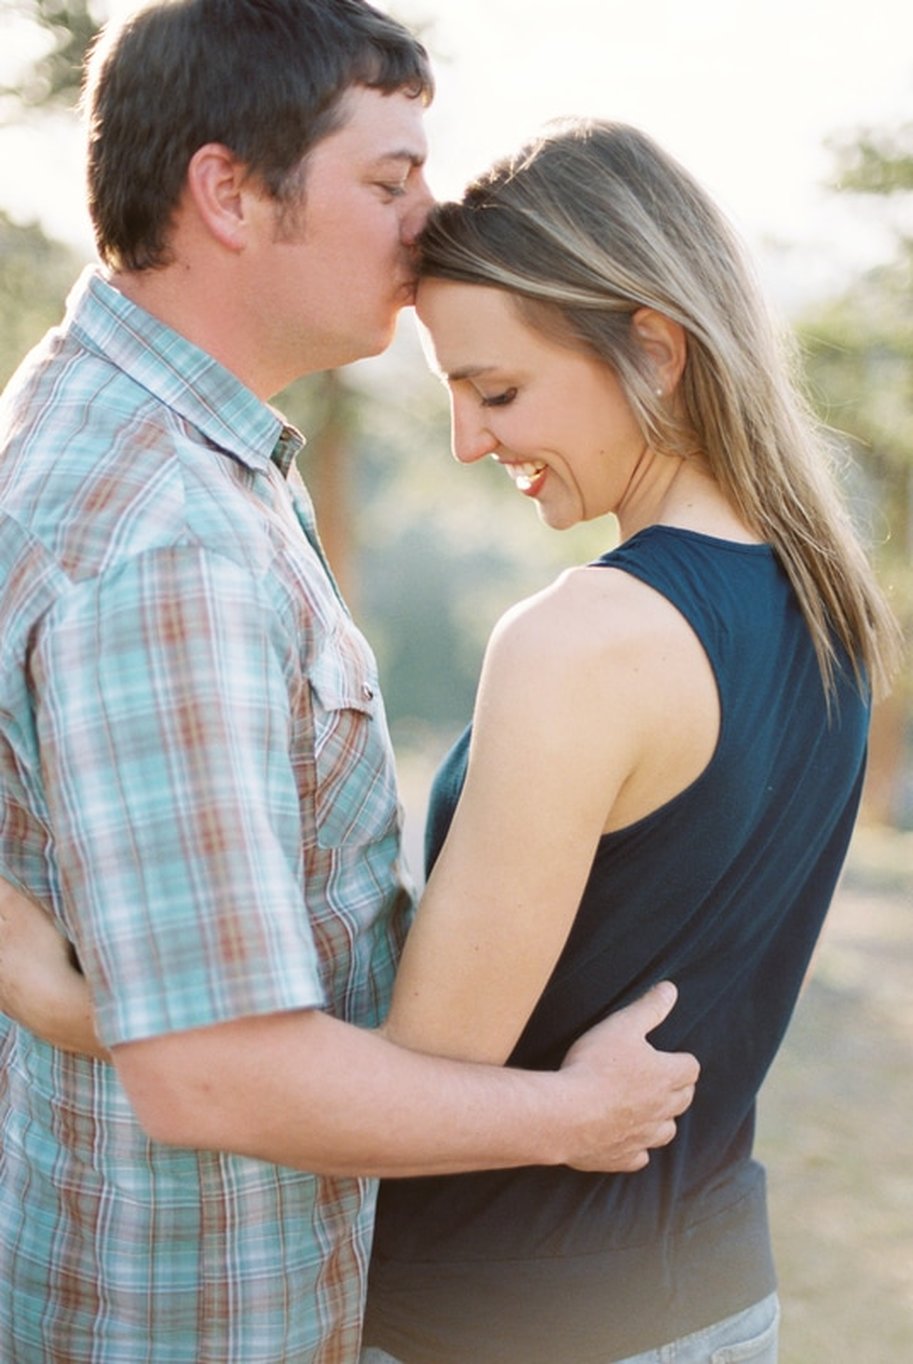 Sun Drenched Mountain Engagement Session